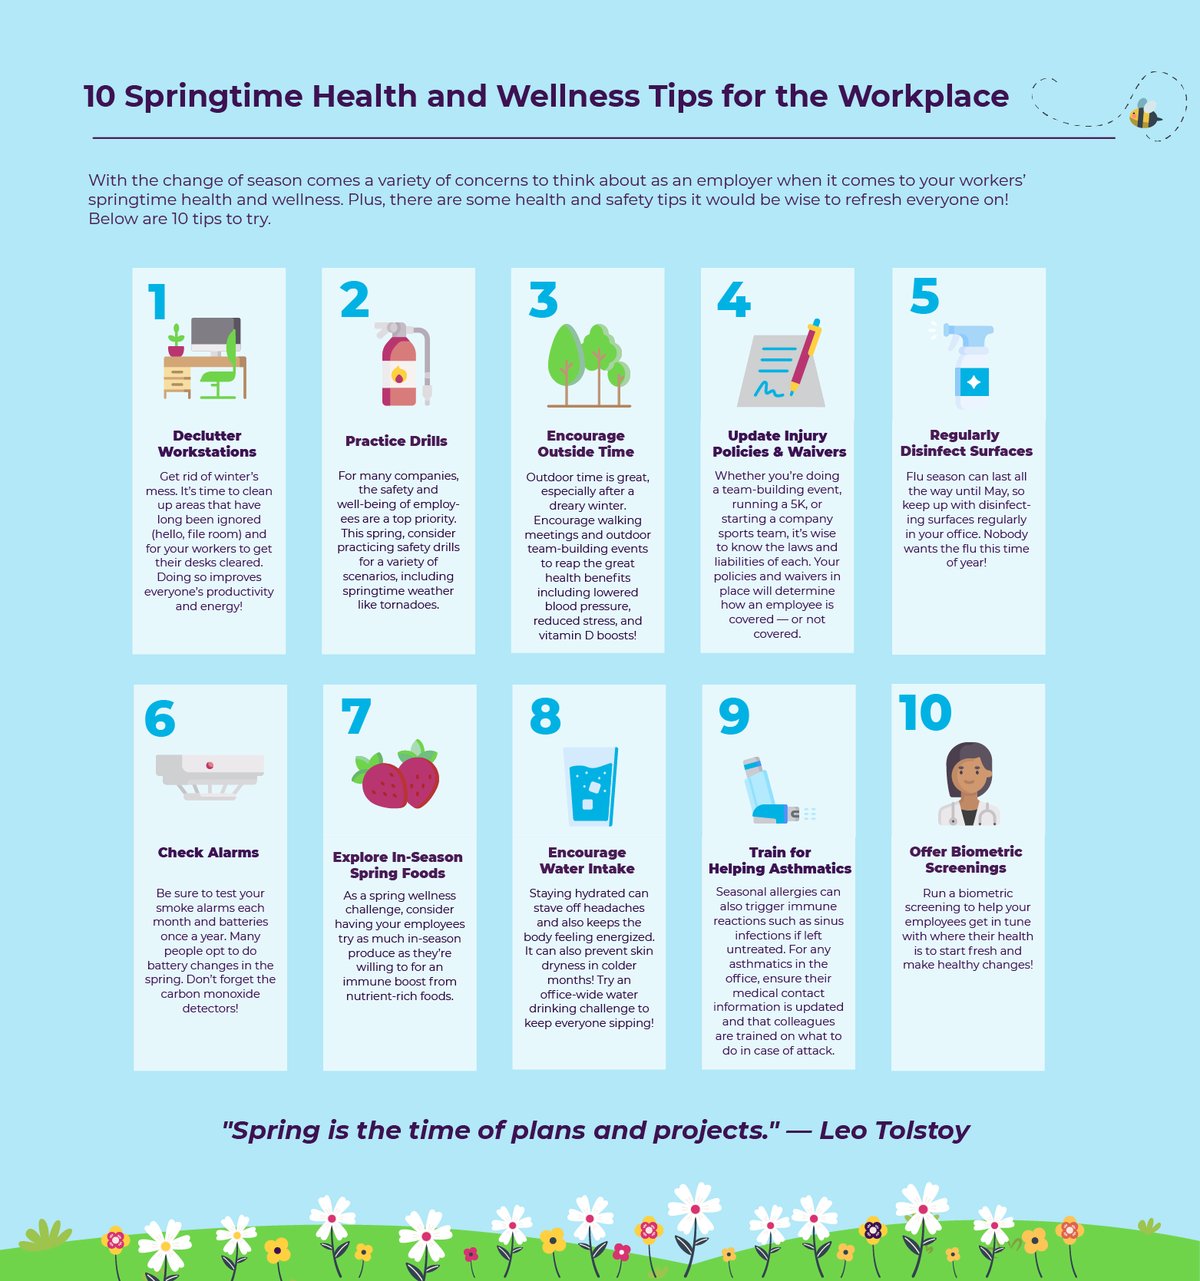 17 Ways to Focus on Springtime Health and Wellness in the Workplace